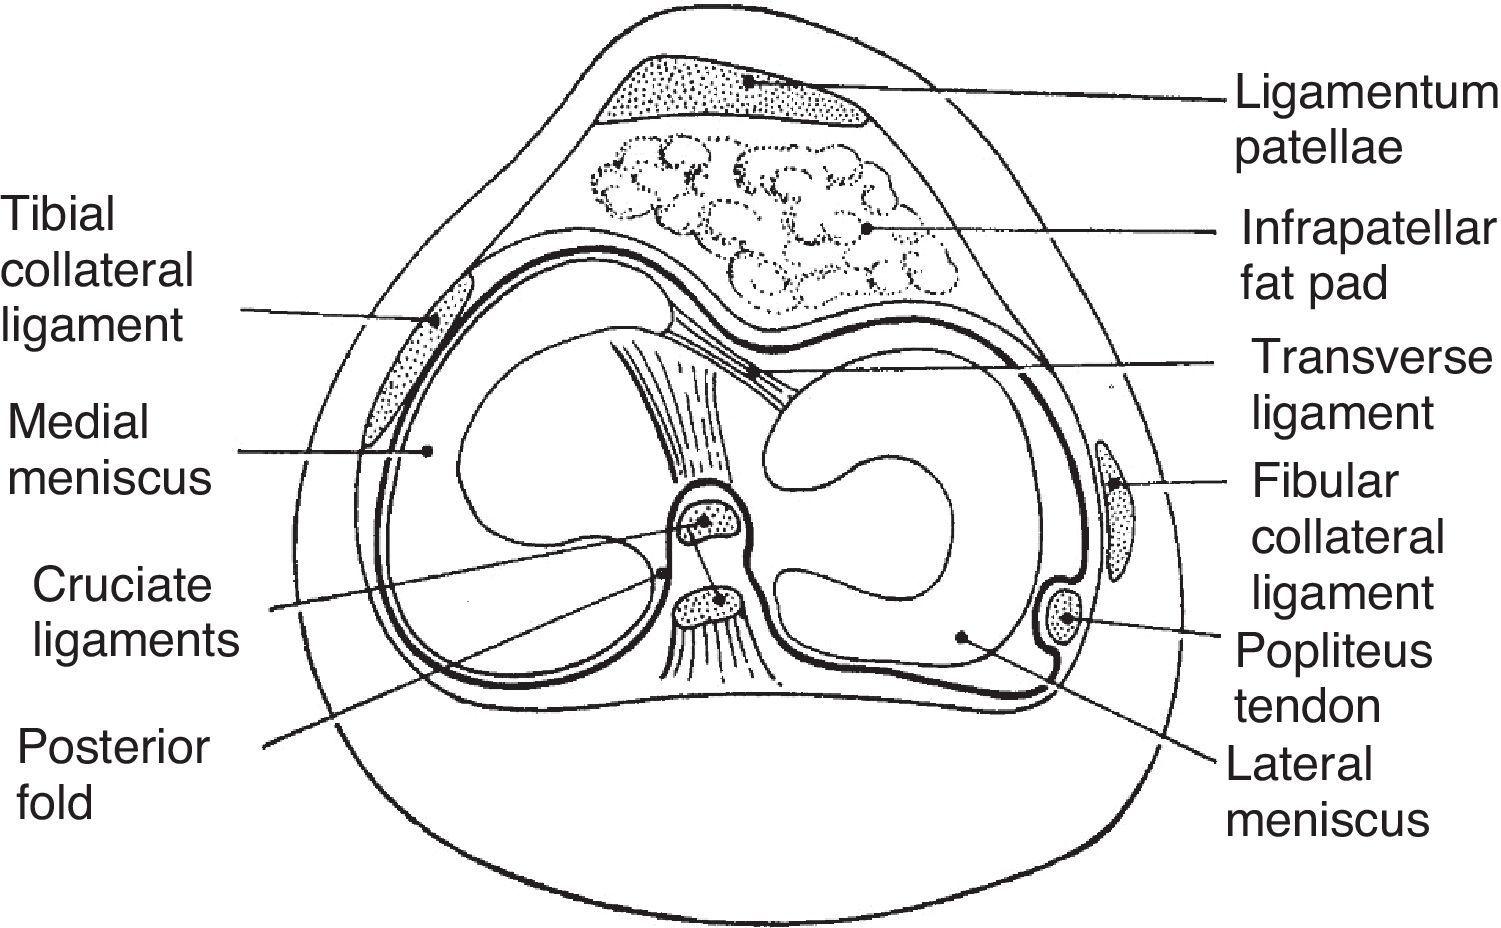 transverse ligament of the knee